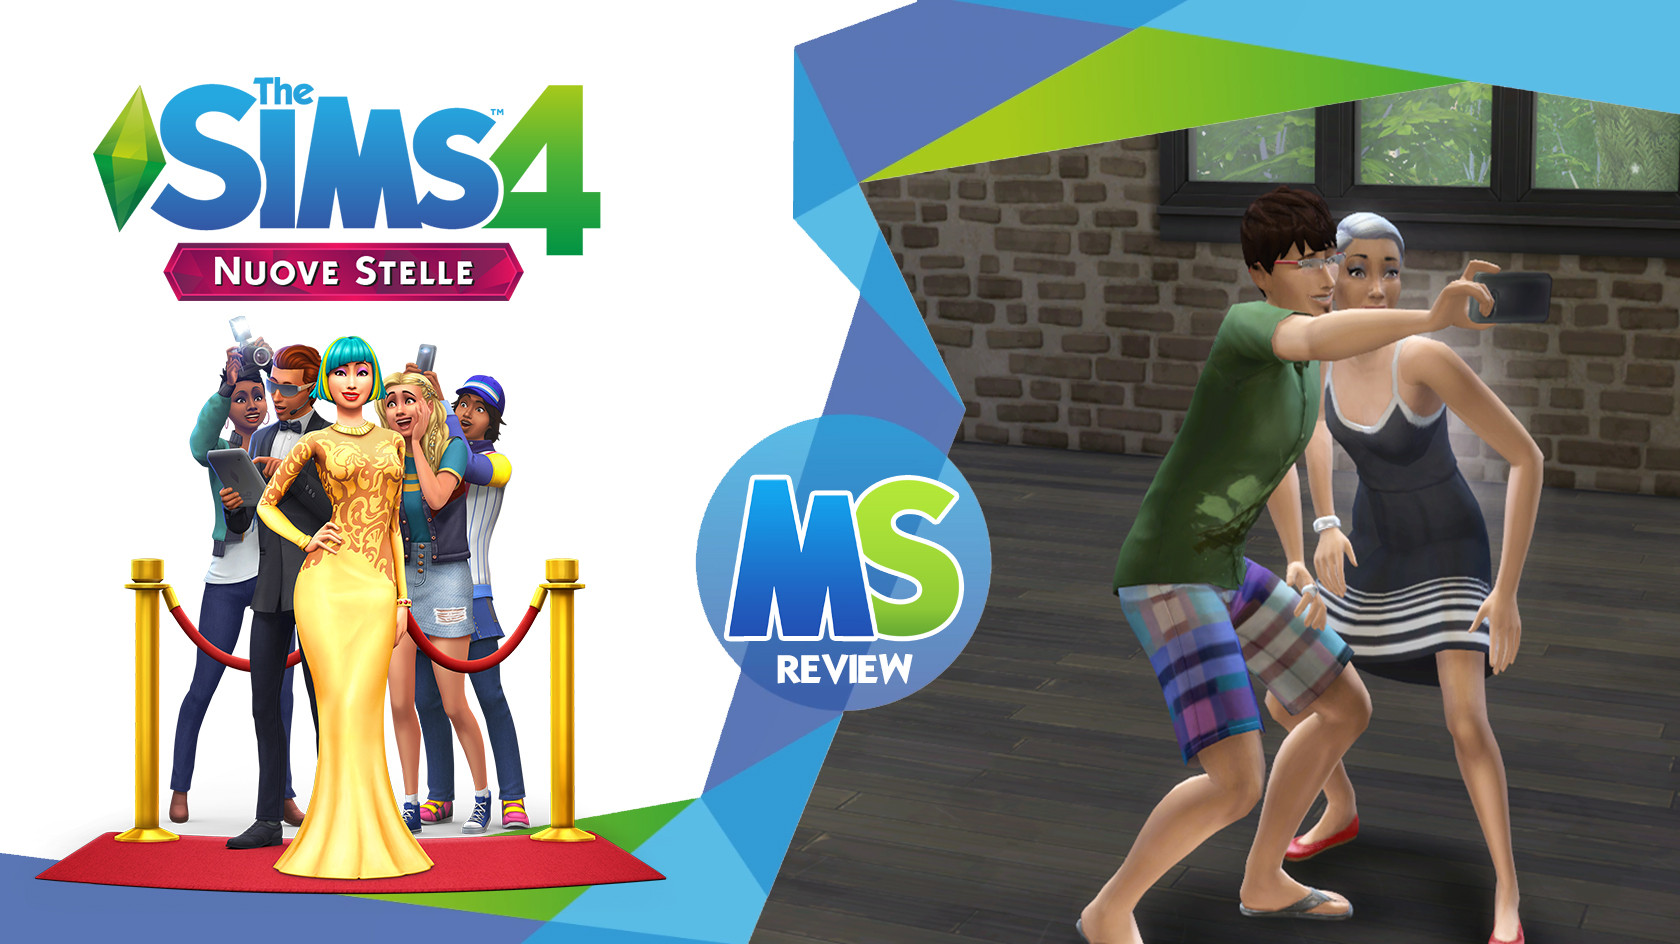 the sims 4 Nuove Stelle review logo